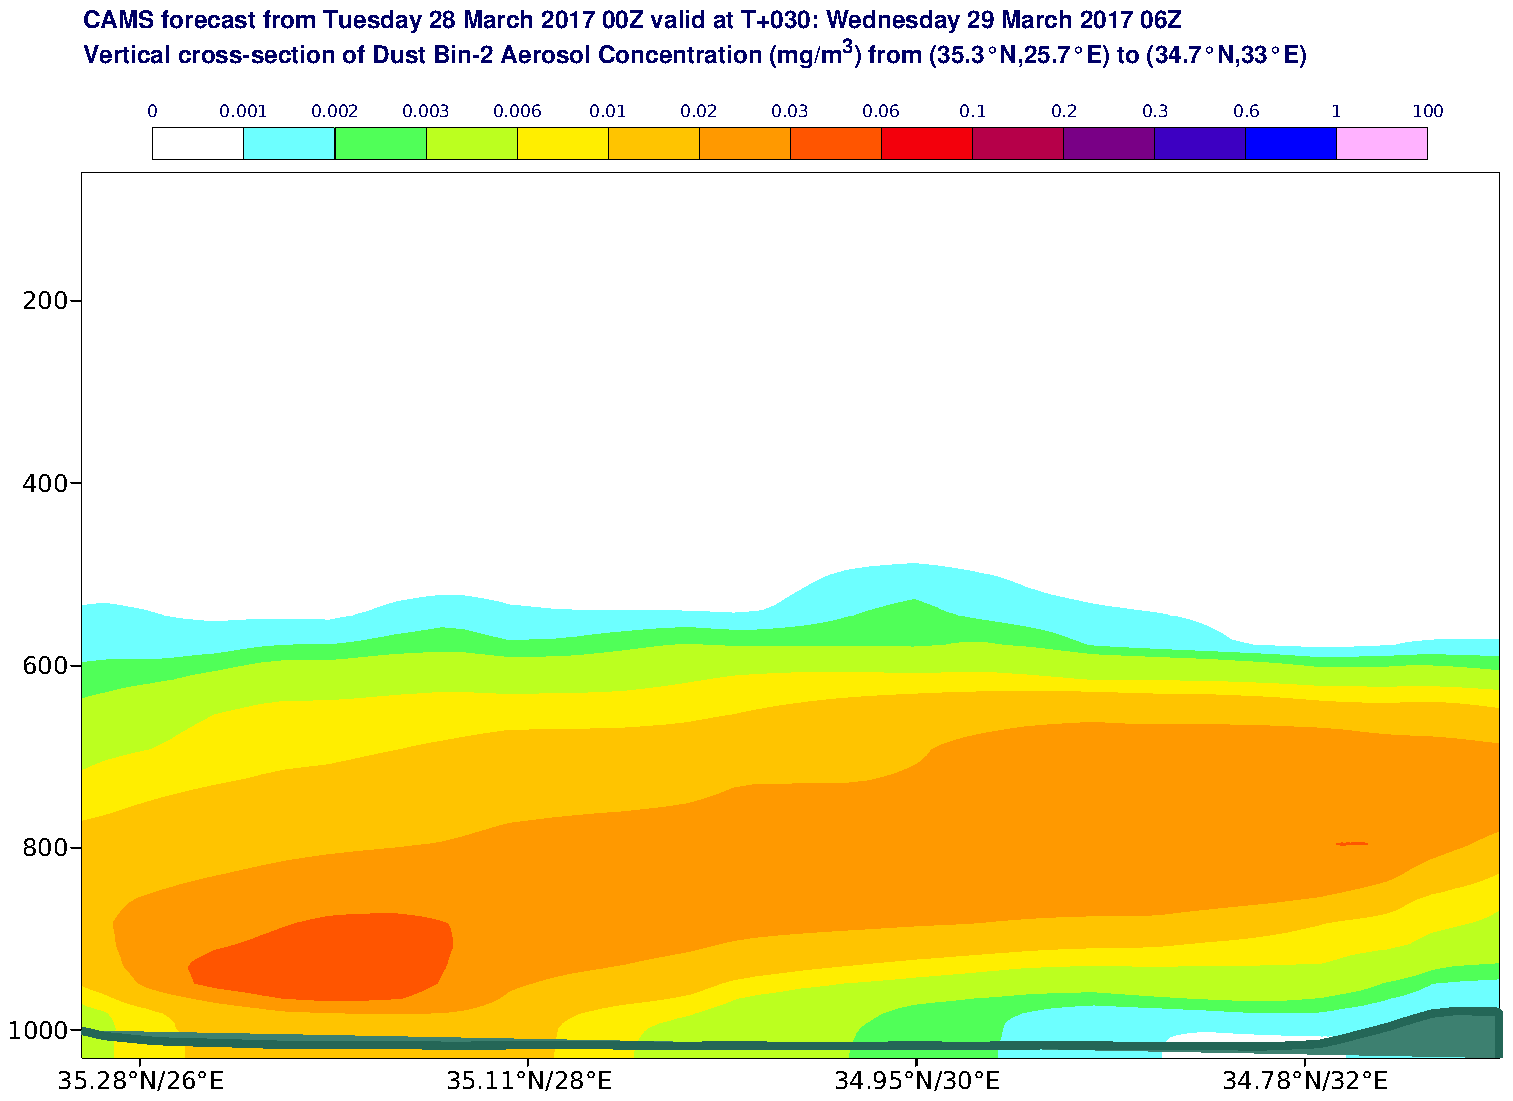 Vertical cross-section of Dust Bin-2 Aerosol Concentration (mg/m3) valid at T30 - 2017-03-29 06:00